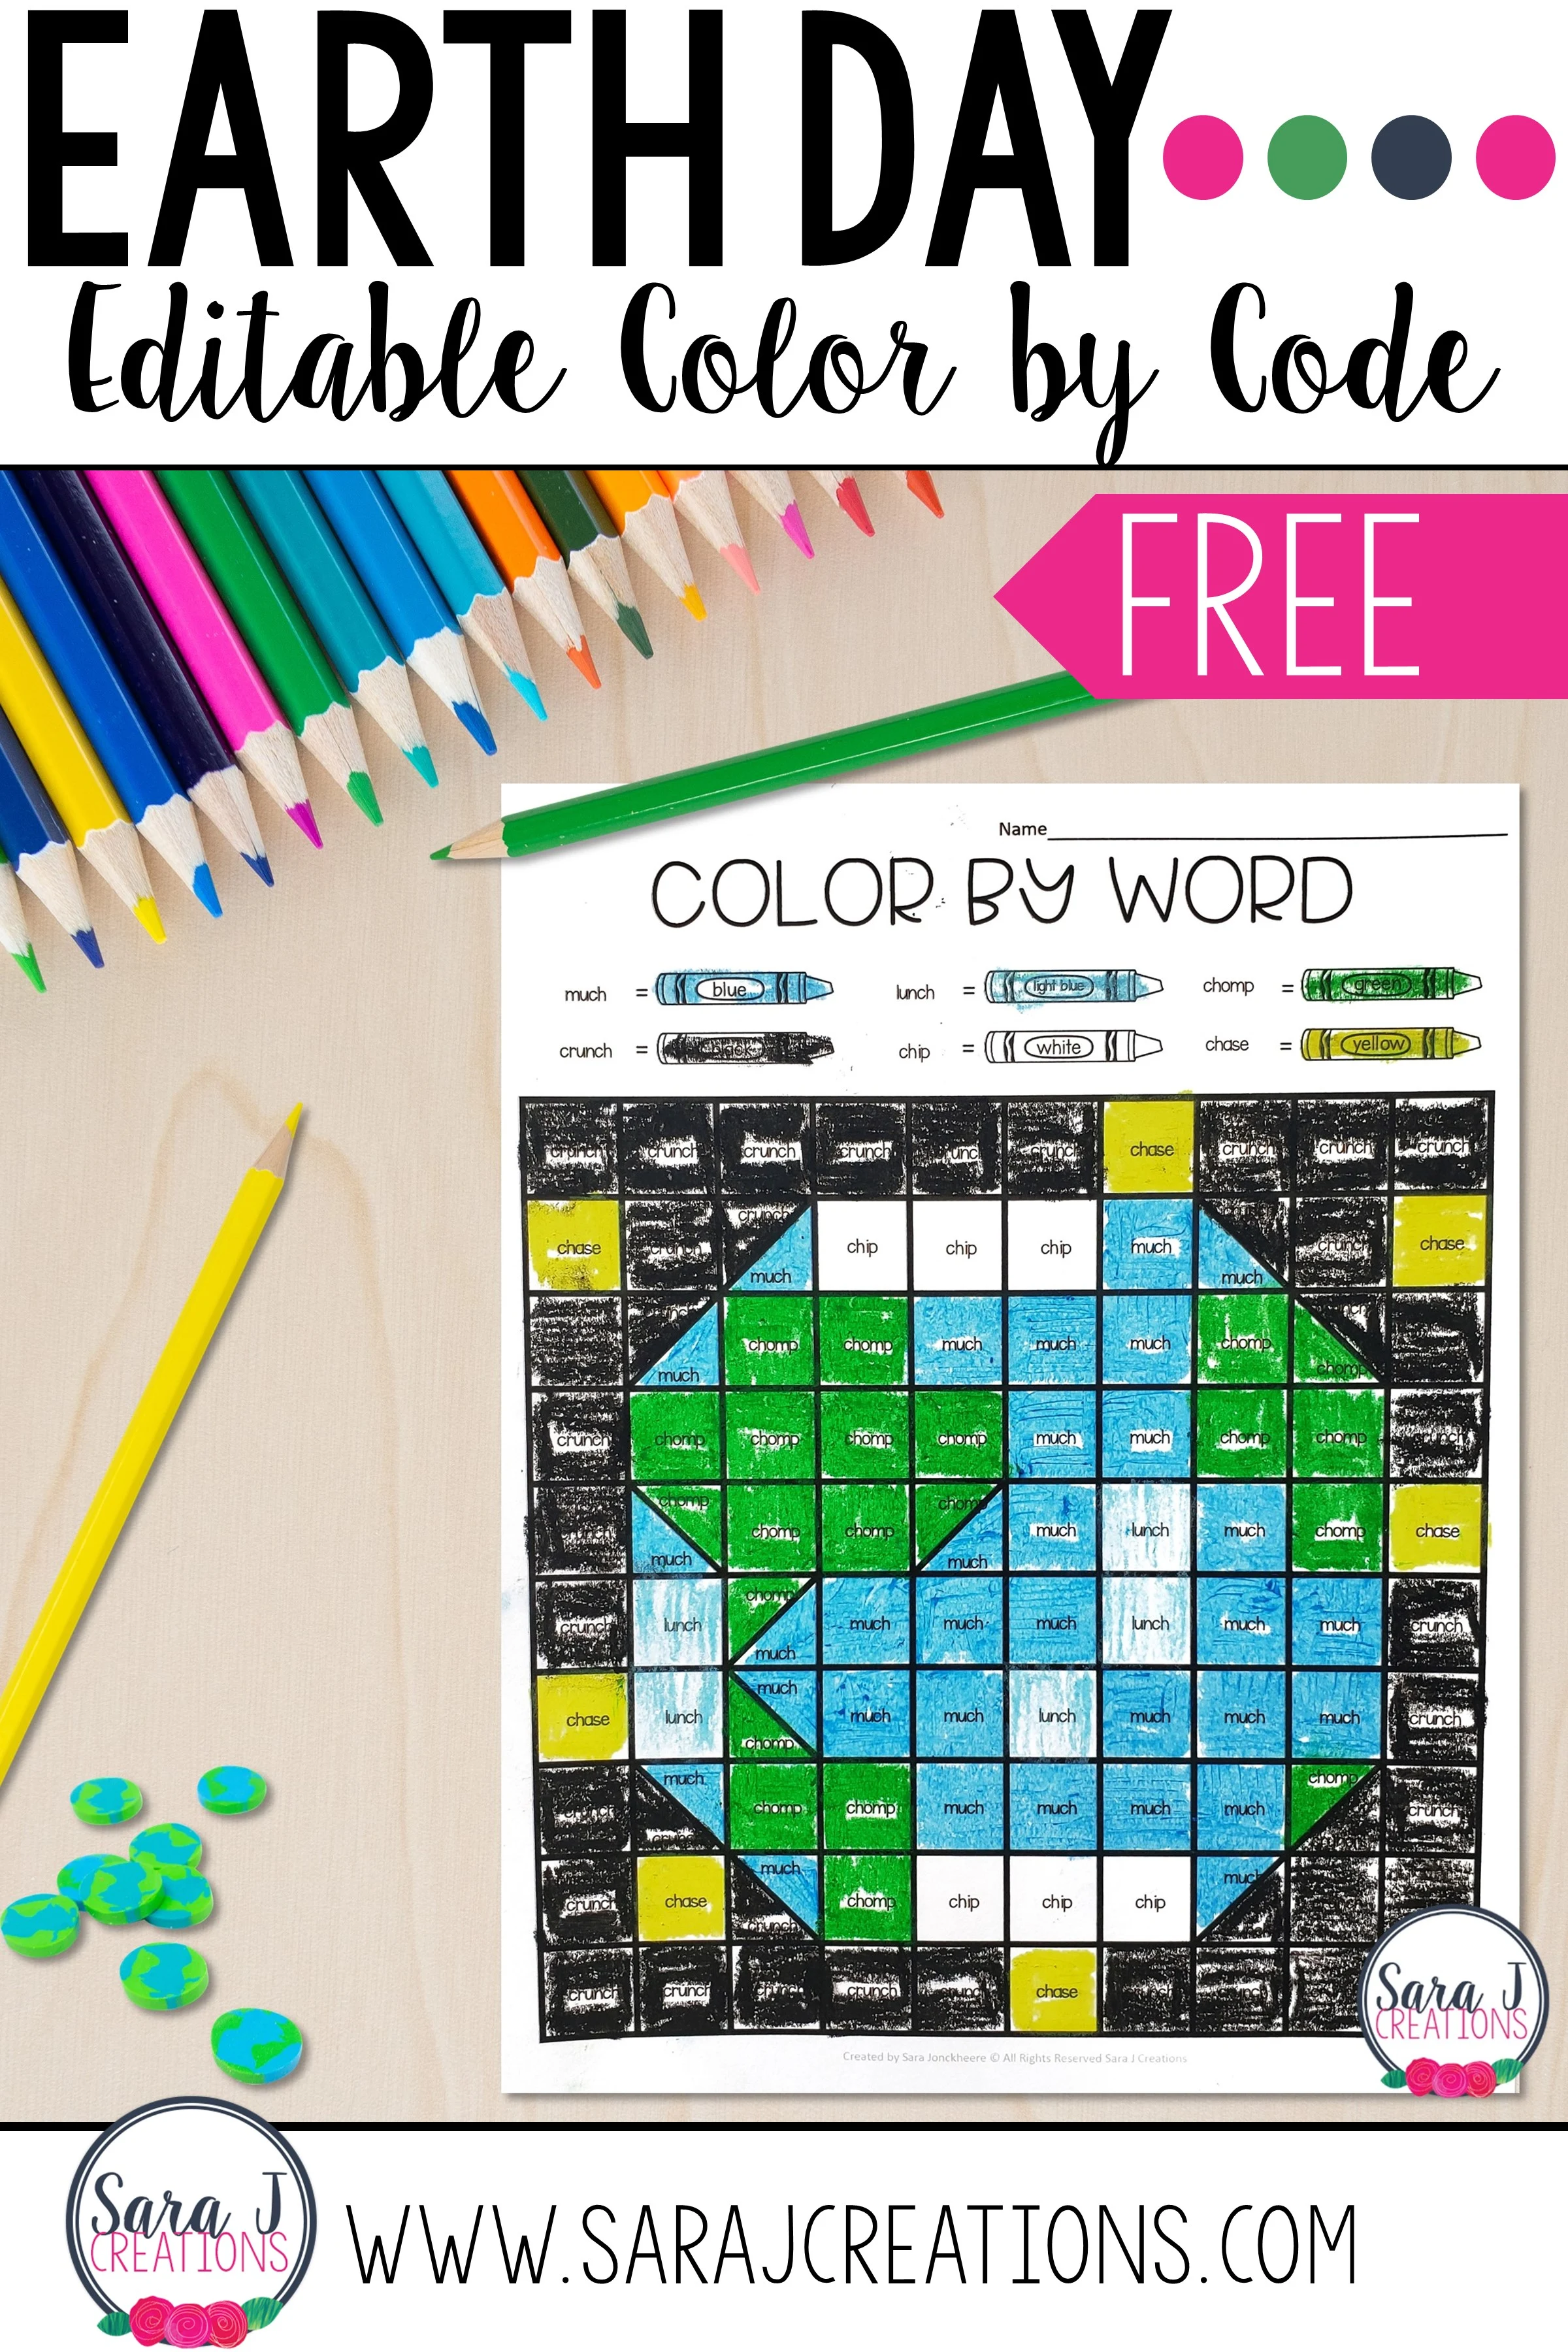 Free Earth Day themed color by sight word mystery pictures. Just type in the words you want and the pictures are created for you!